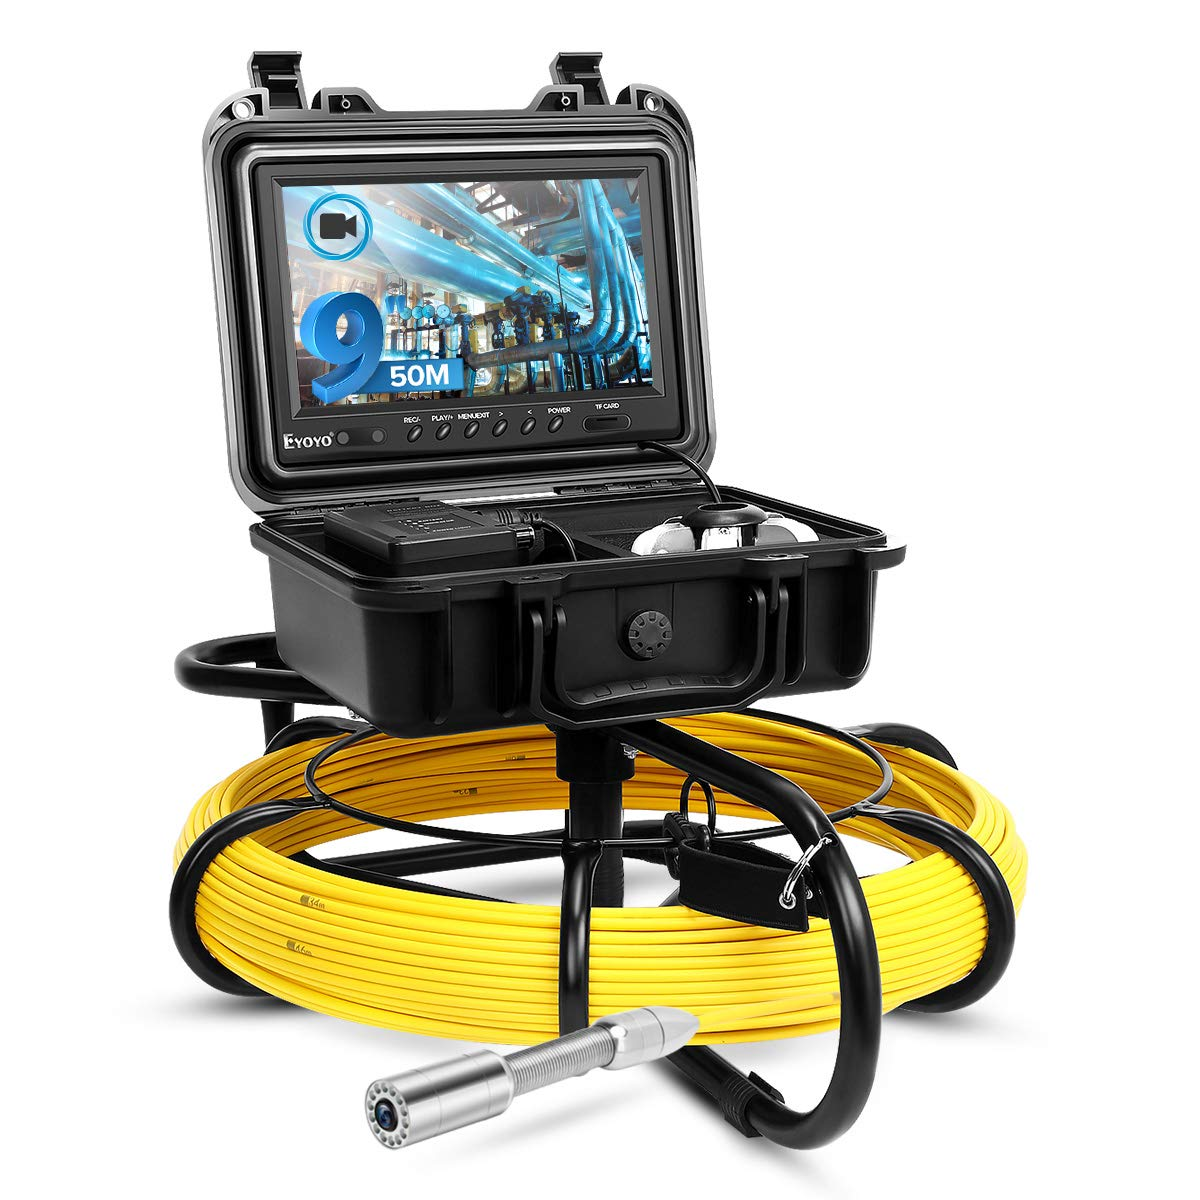 Details about   7in LCD Drain Endoscope Plumbing System Sewer Camera W/DVR Record&Photo Function 